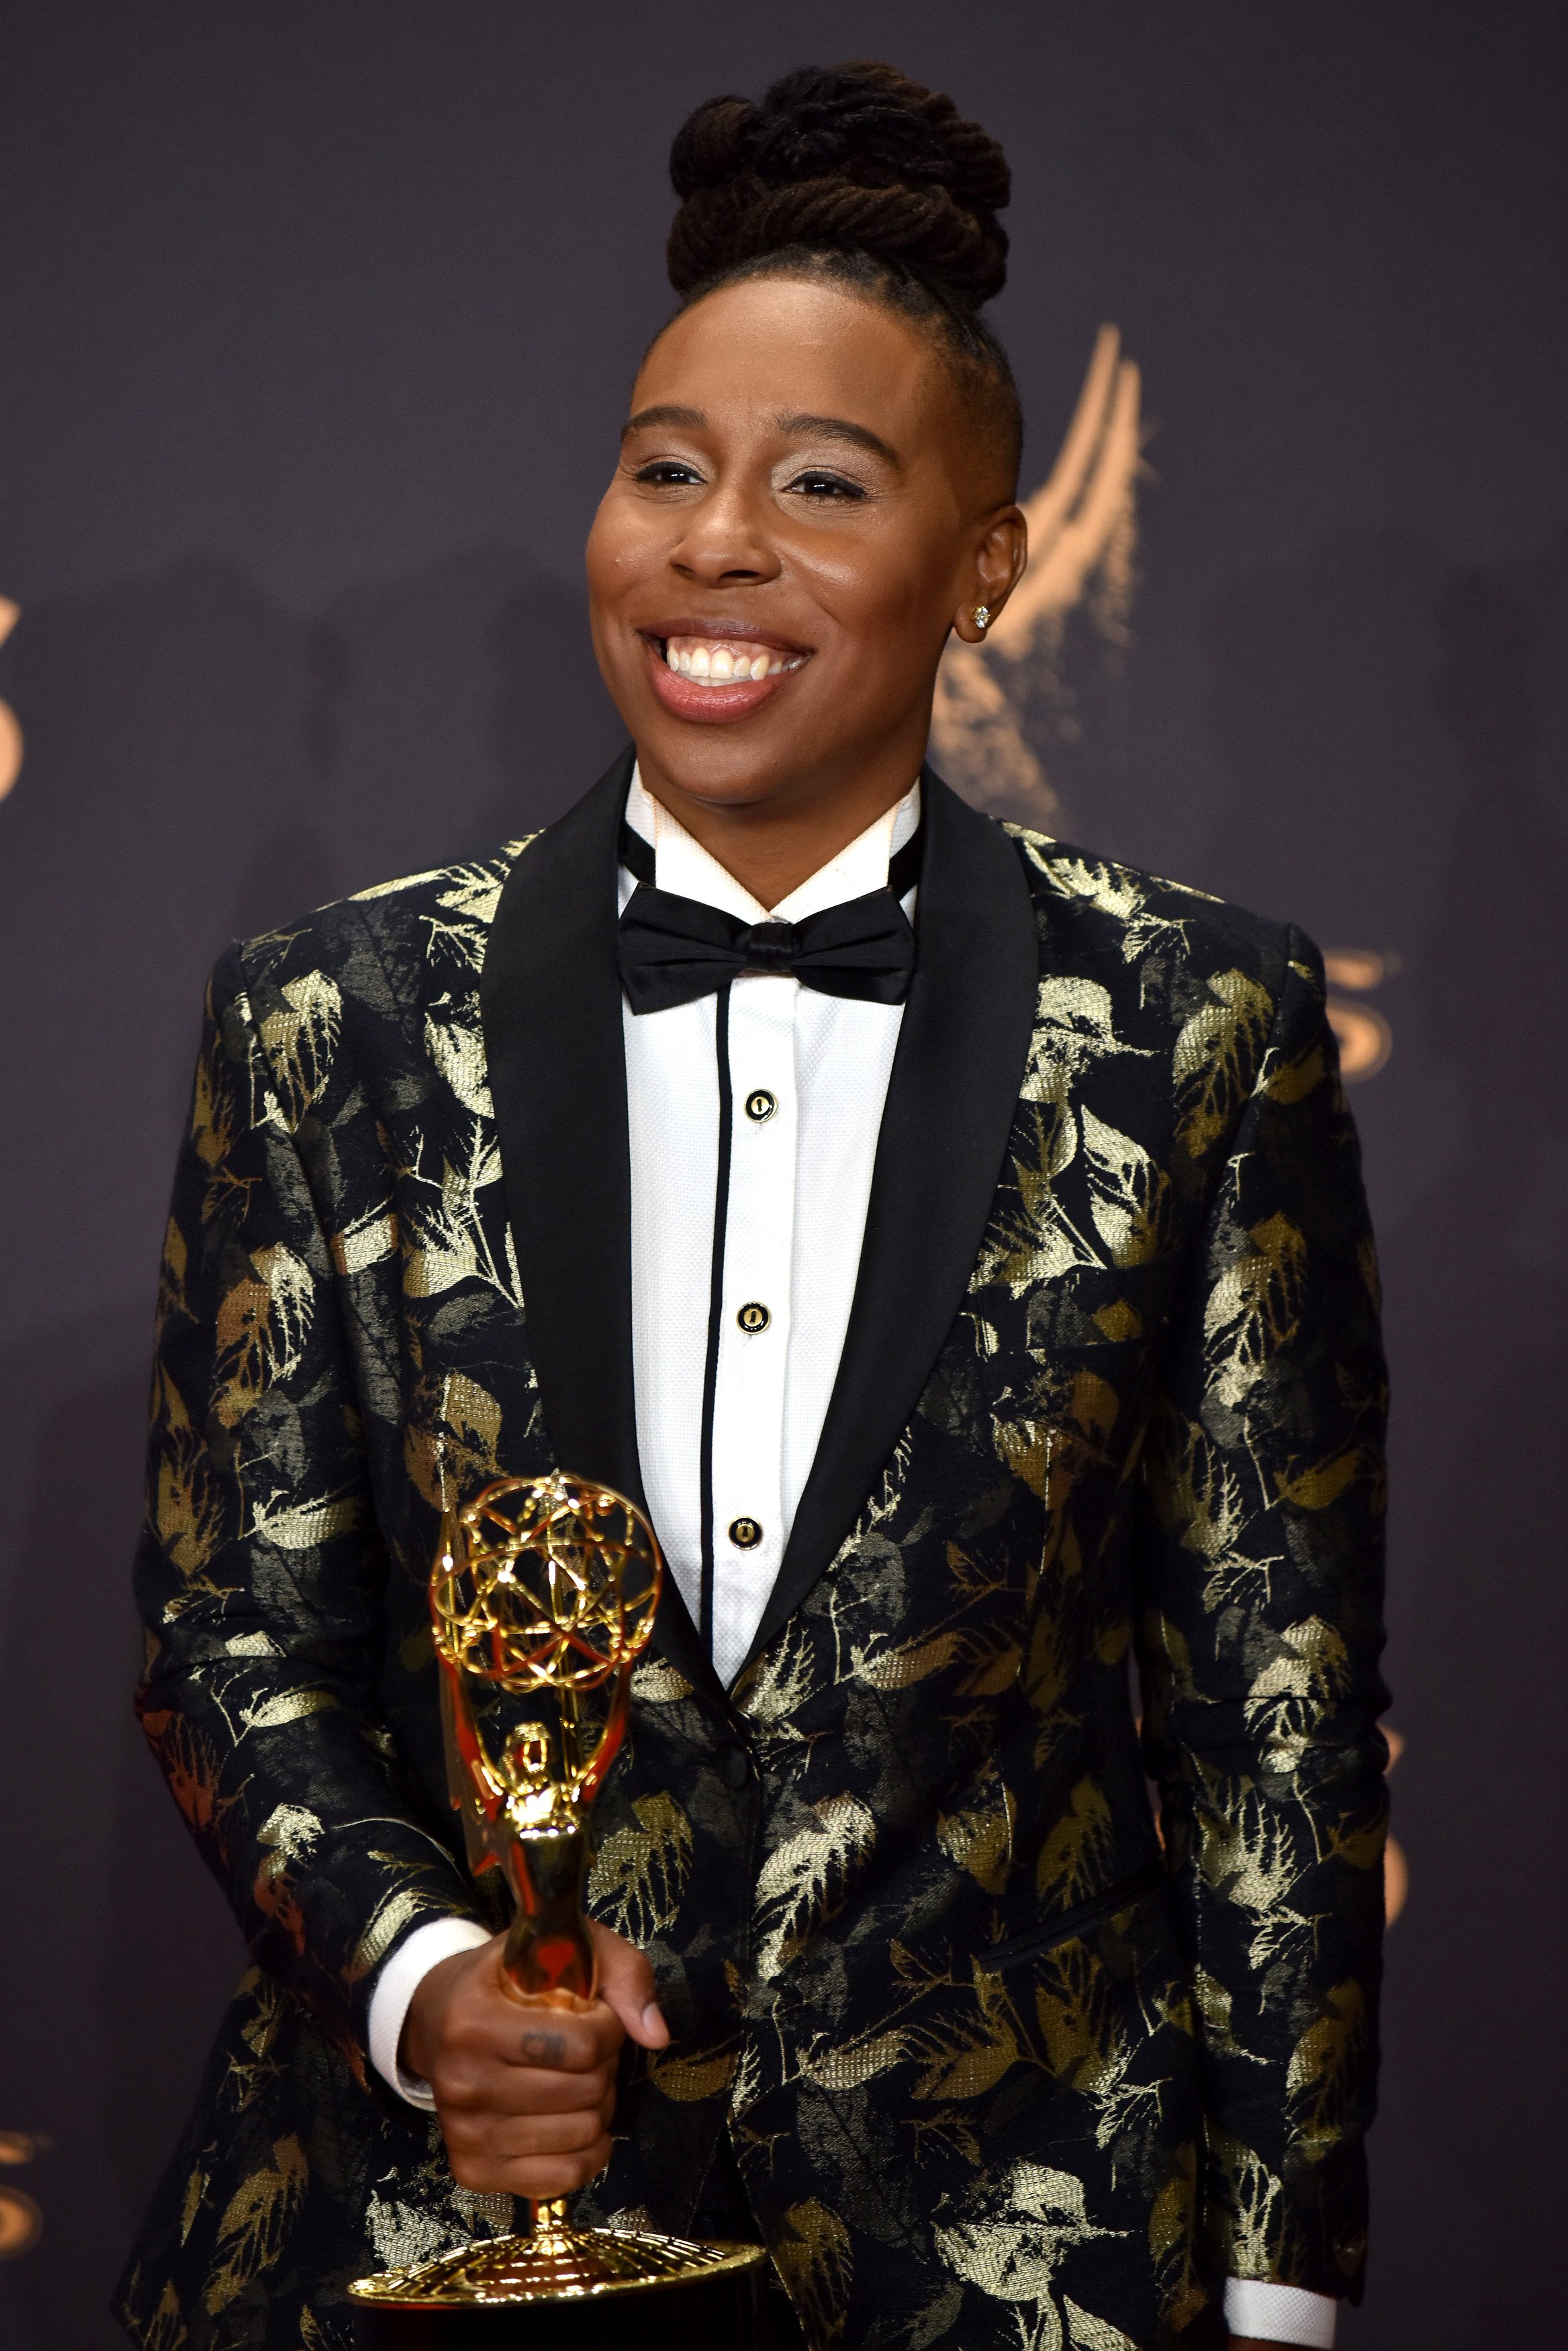 <p>During the <a href="https://www.wonderwall.com/awards-events/emmys/2017-emmy-awards-red-carpet-3009953.gallery">2017 Emmys</a> on Sept. 18, Lena Waithe became the first Black woman to win an Emmy for outstanding writing for a comedy series. She shared the award with colleague Aziz Ansari for their work on his show "Master of None."</p>